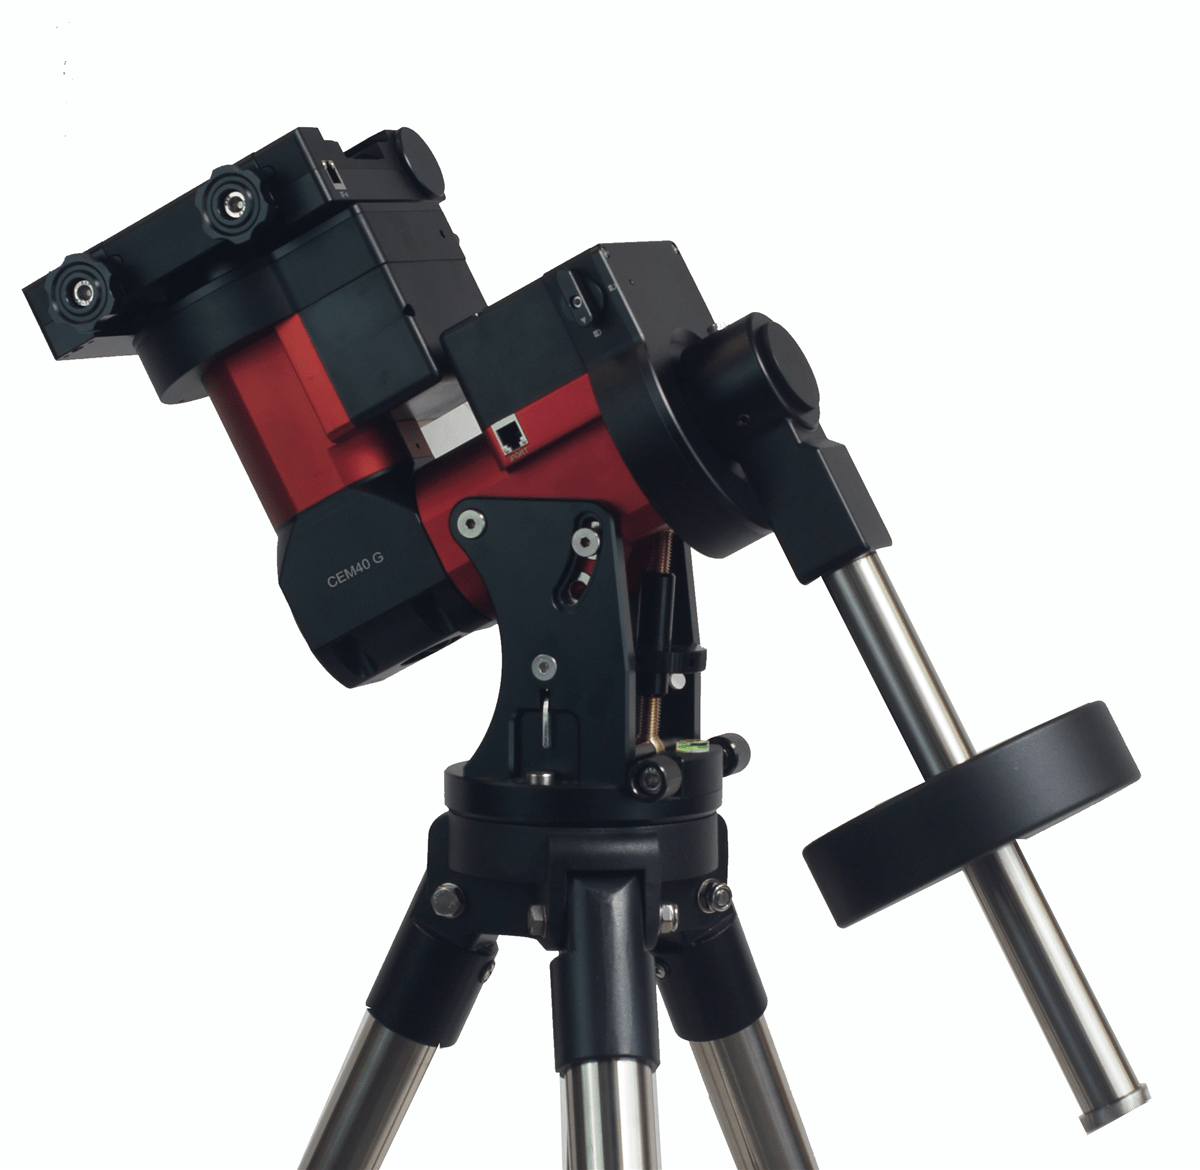 iOptron Mount iOptron CEM40 C401A Mount with iPolar, LiteRoc 7623 Tripod and 8027 Counterweight - C401A3